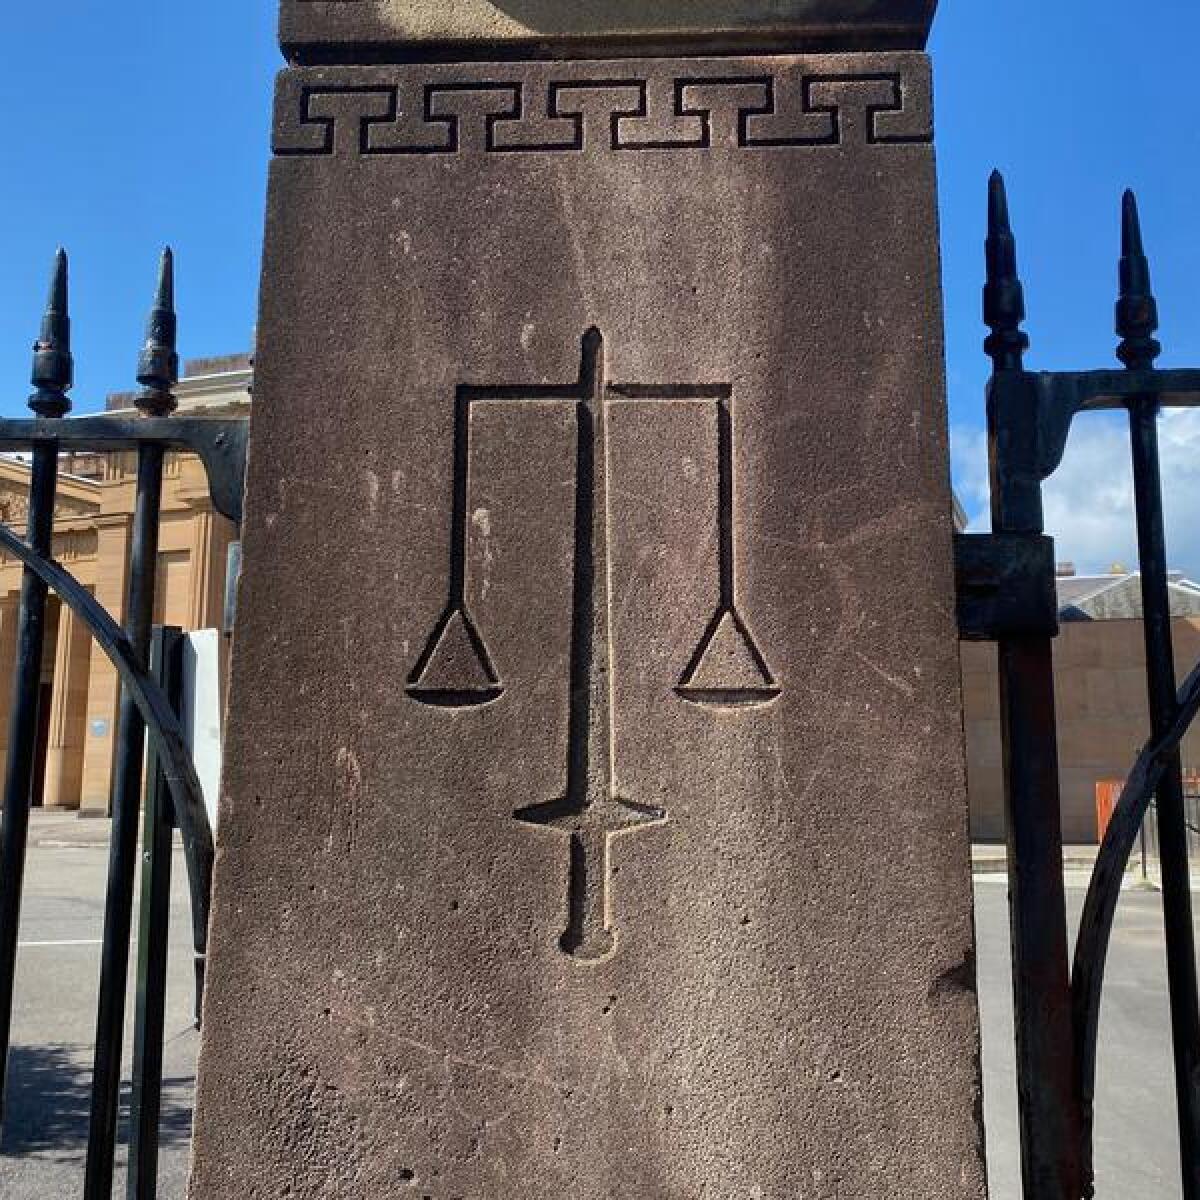 The scales of justice engraved on a pillar (file image)